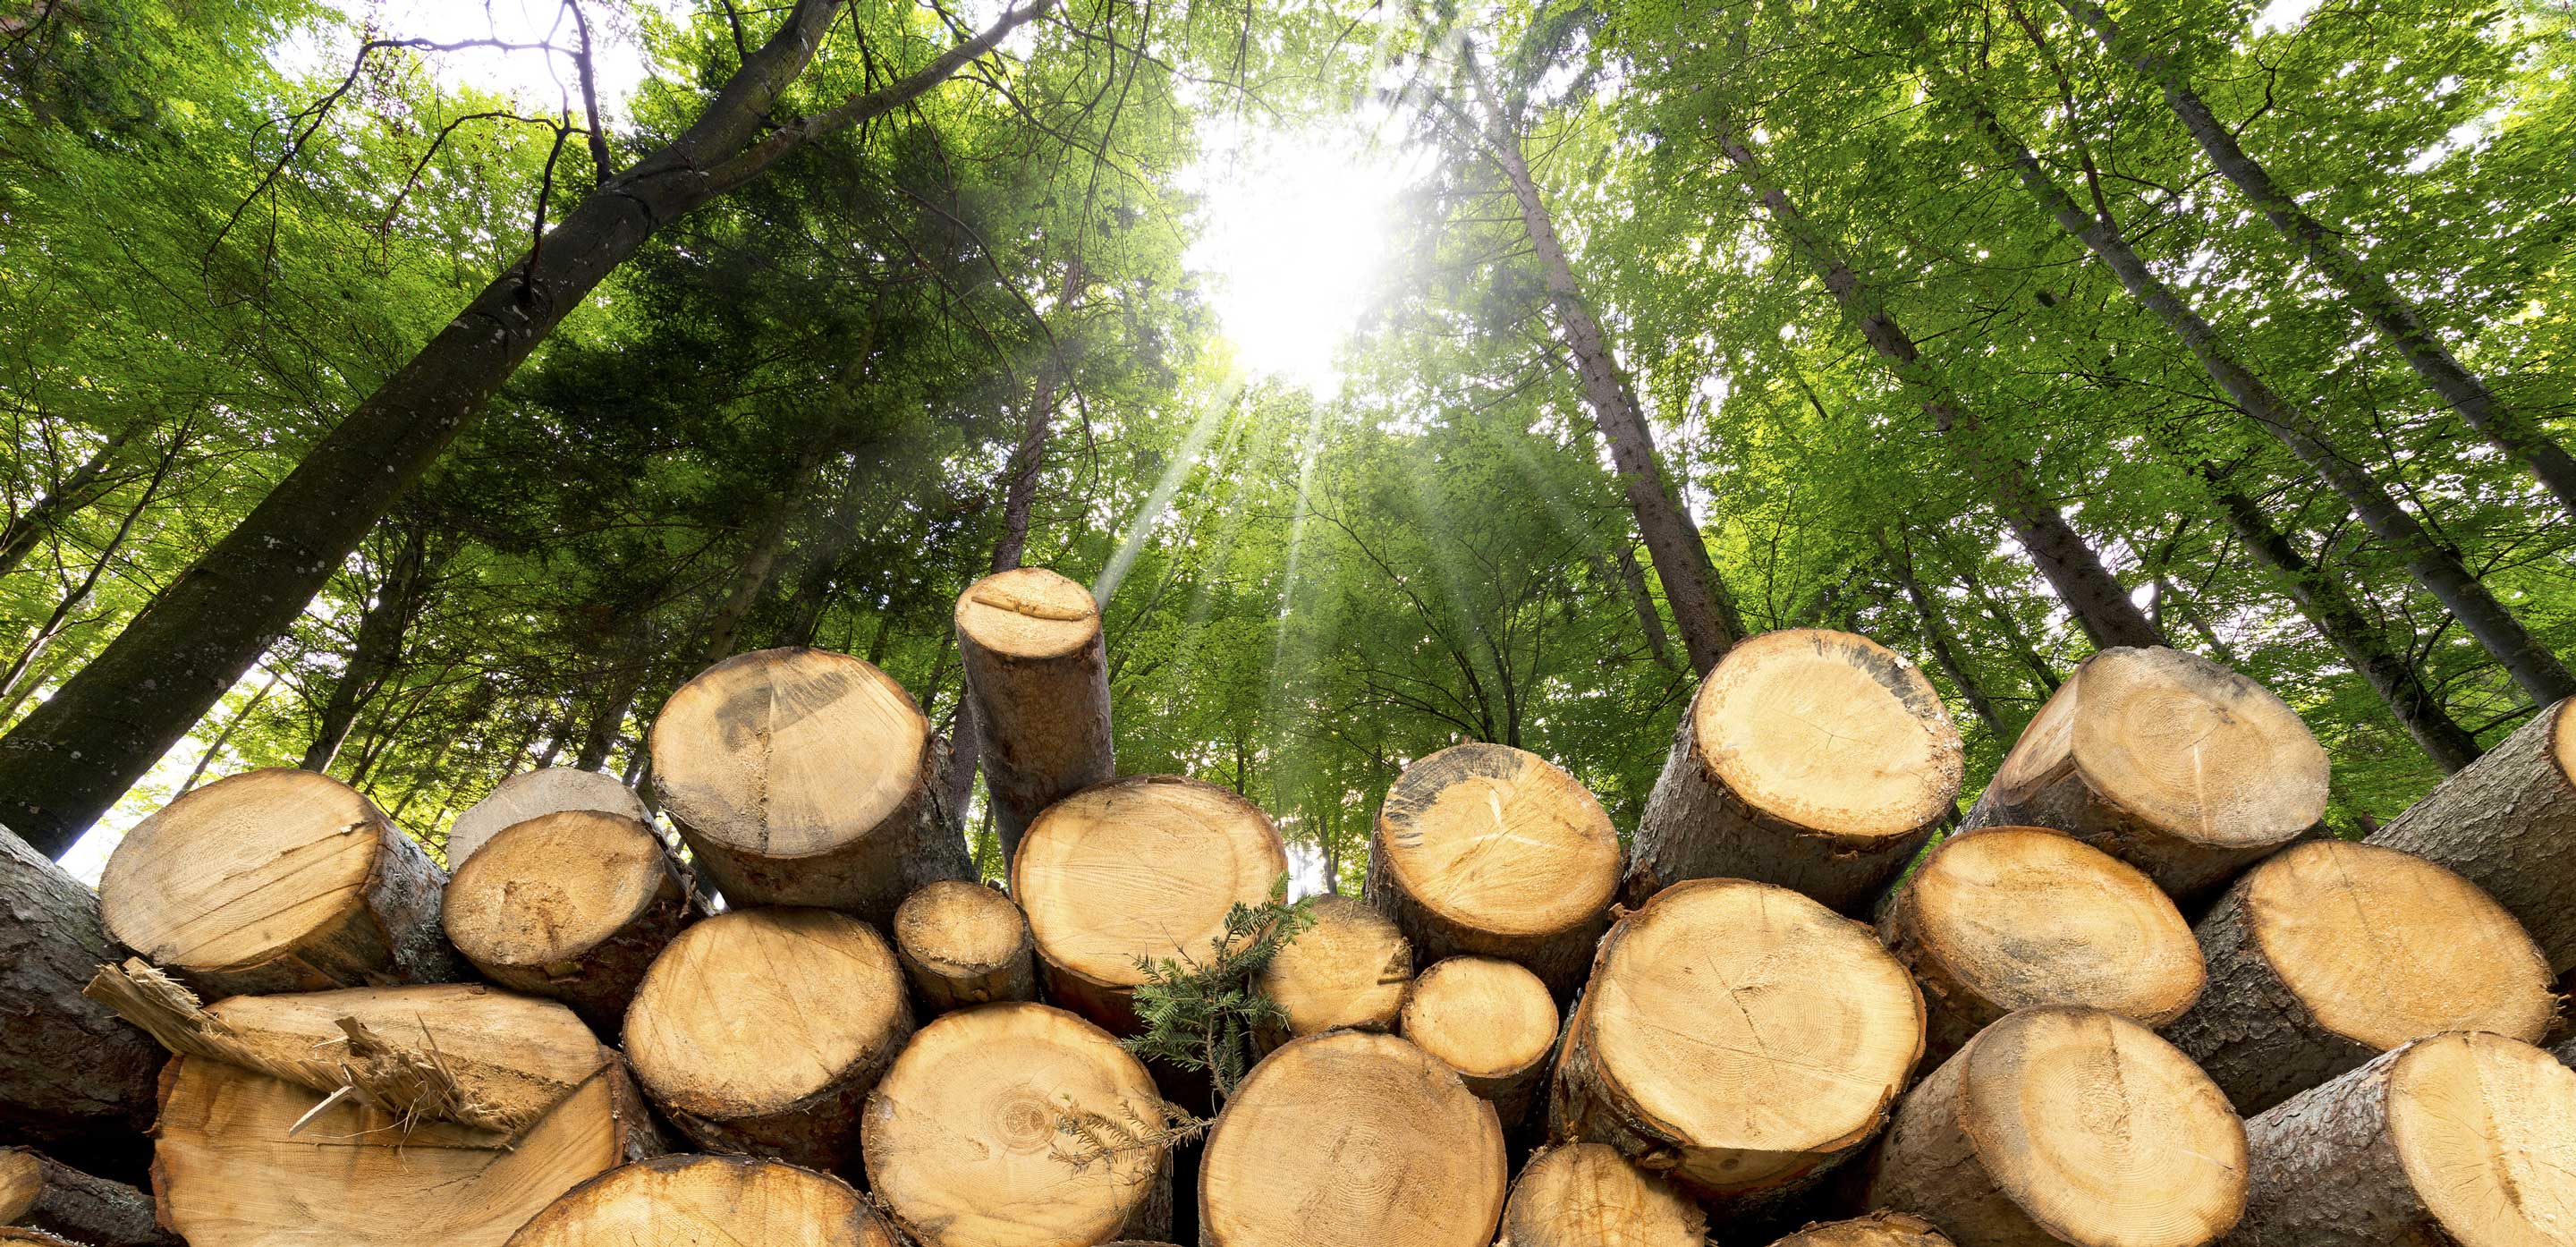 The need to use sustainably sourced wood